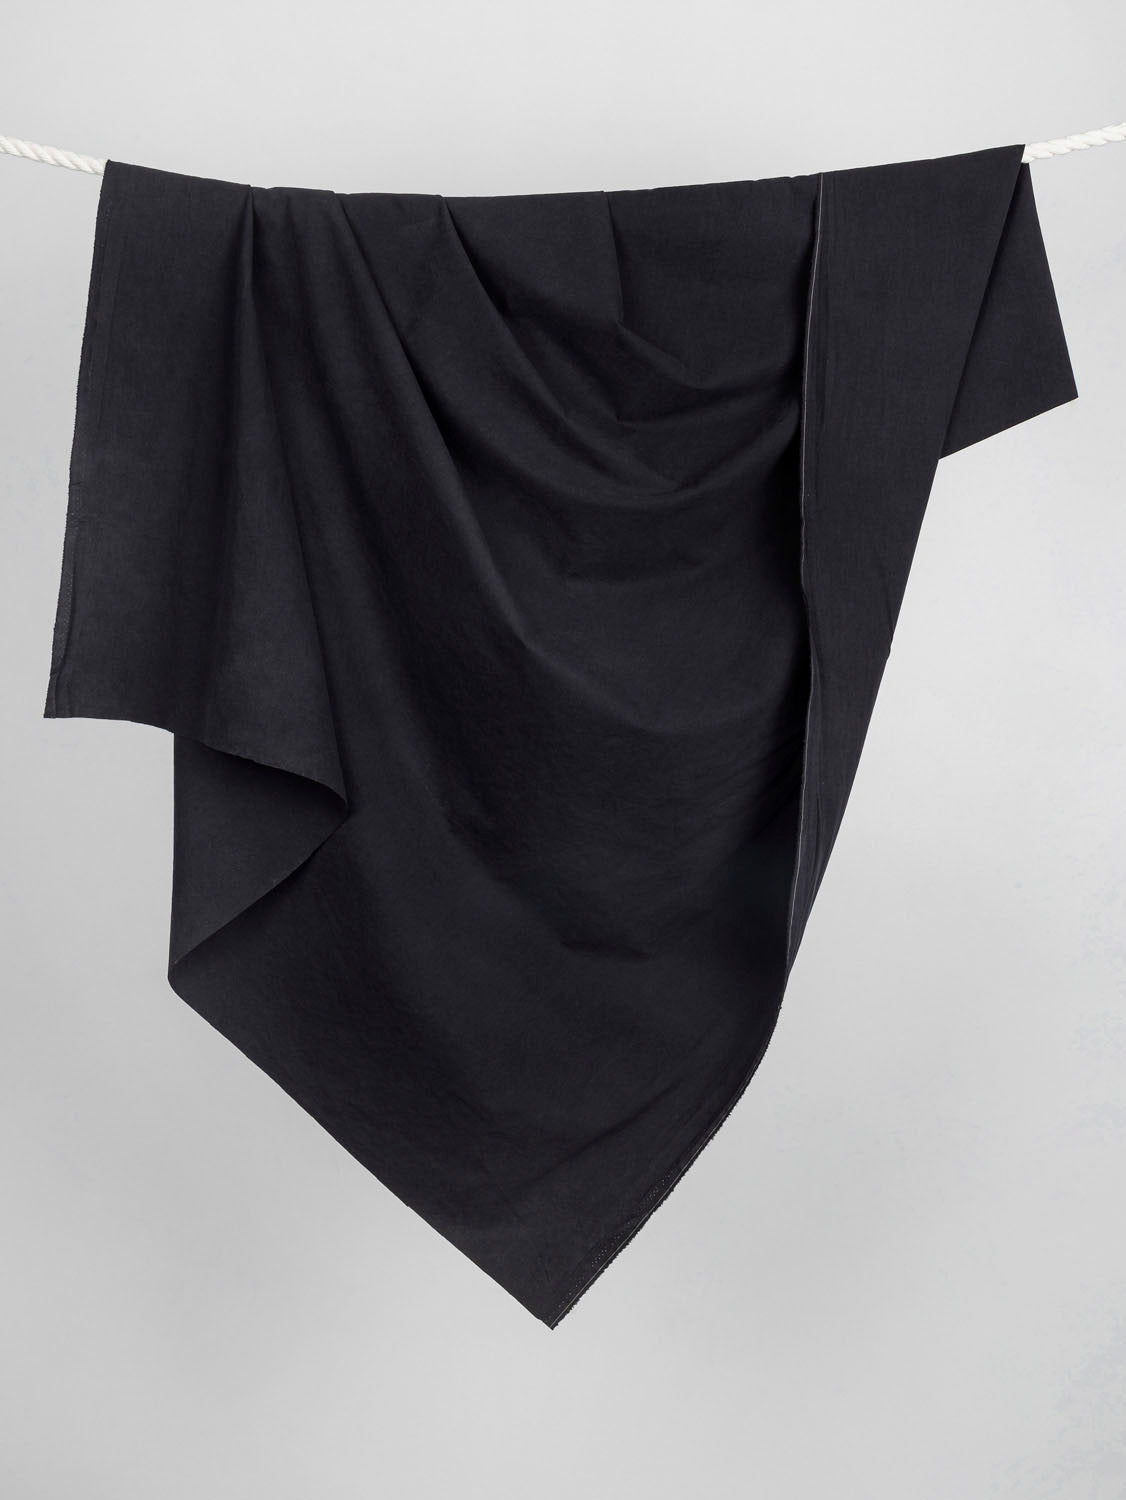 Cotton Broadcloth Black, Fabric by the Yard